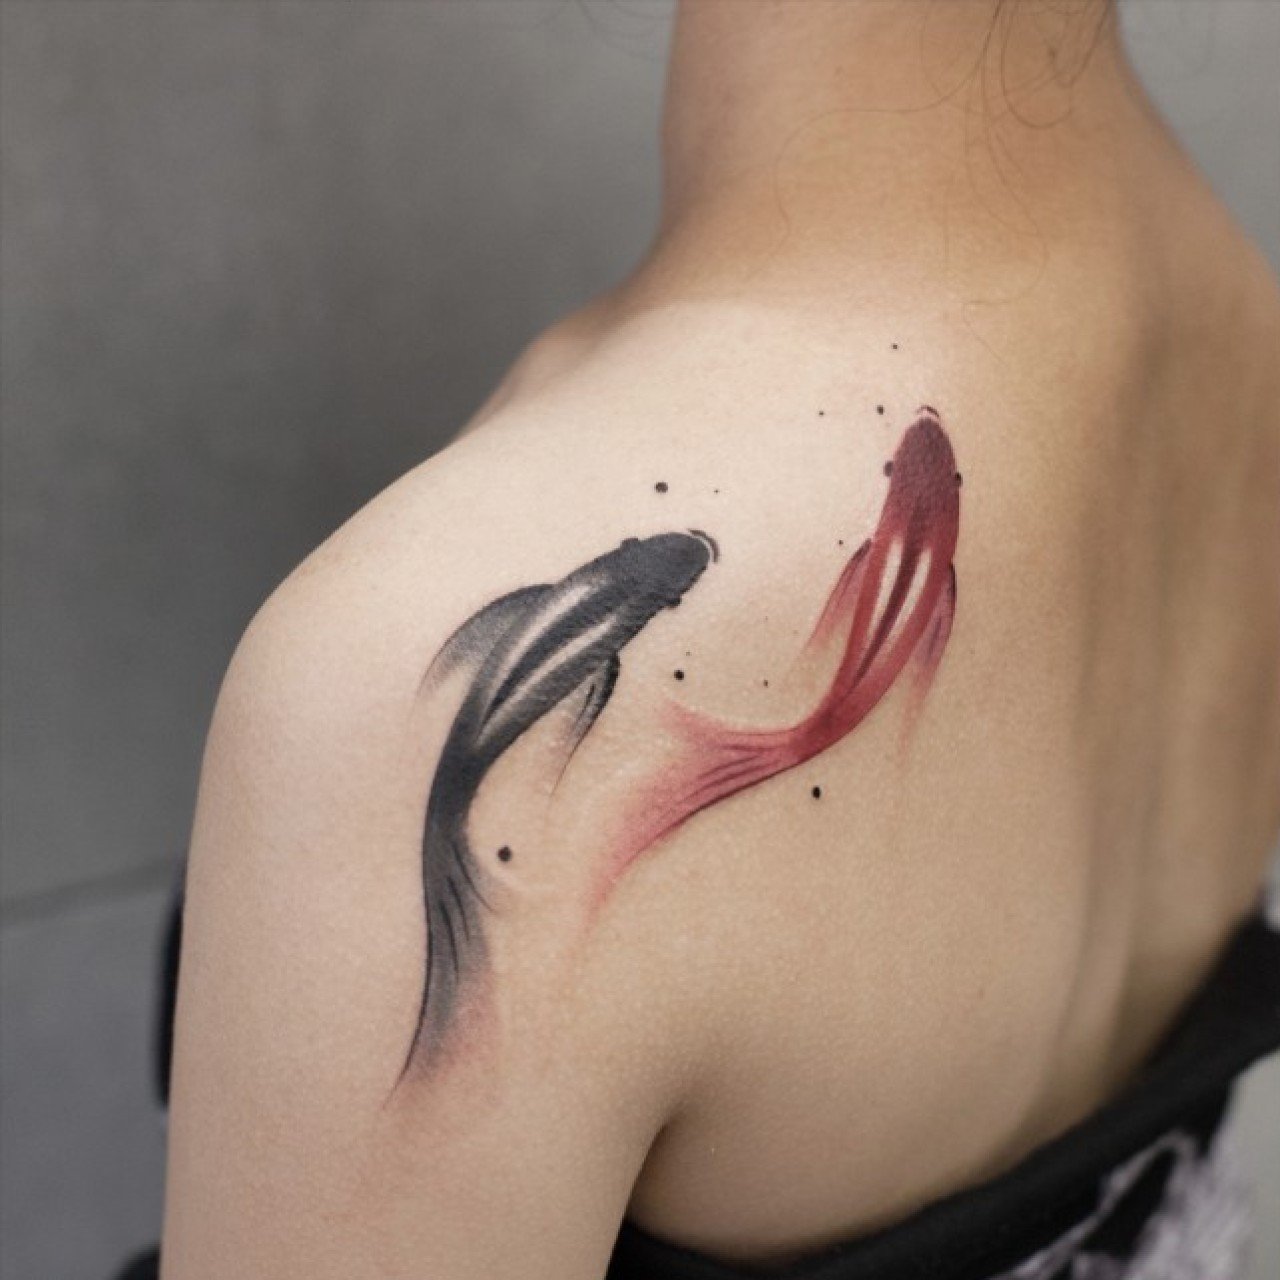 The Chinese tattoo artist turning traditional watercolour paintings into  skin art | South China Morning Post | LINE TODAY